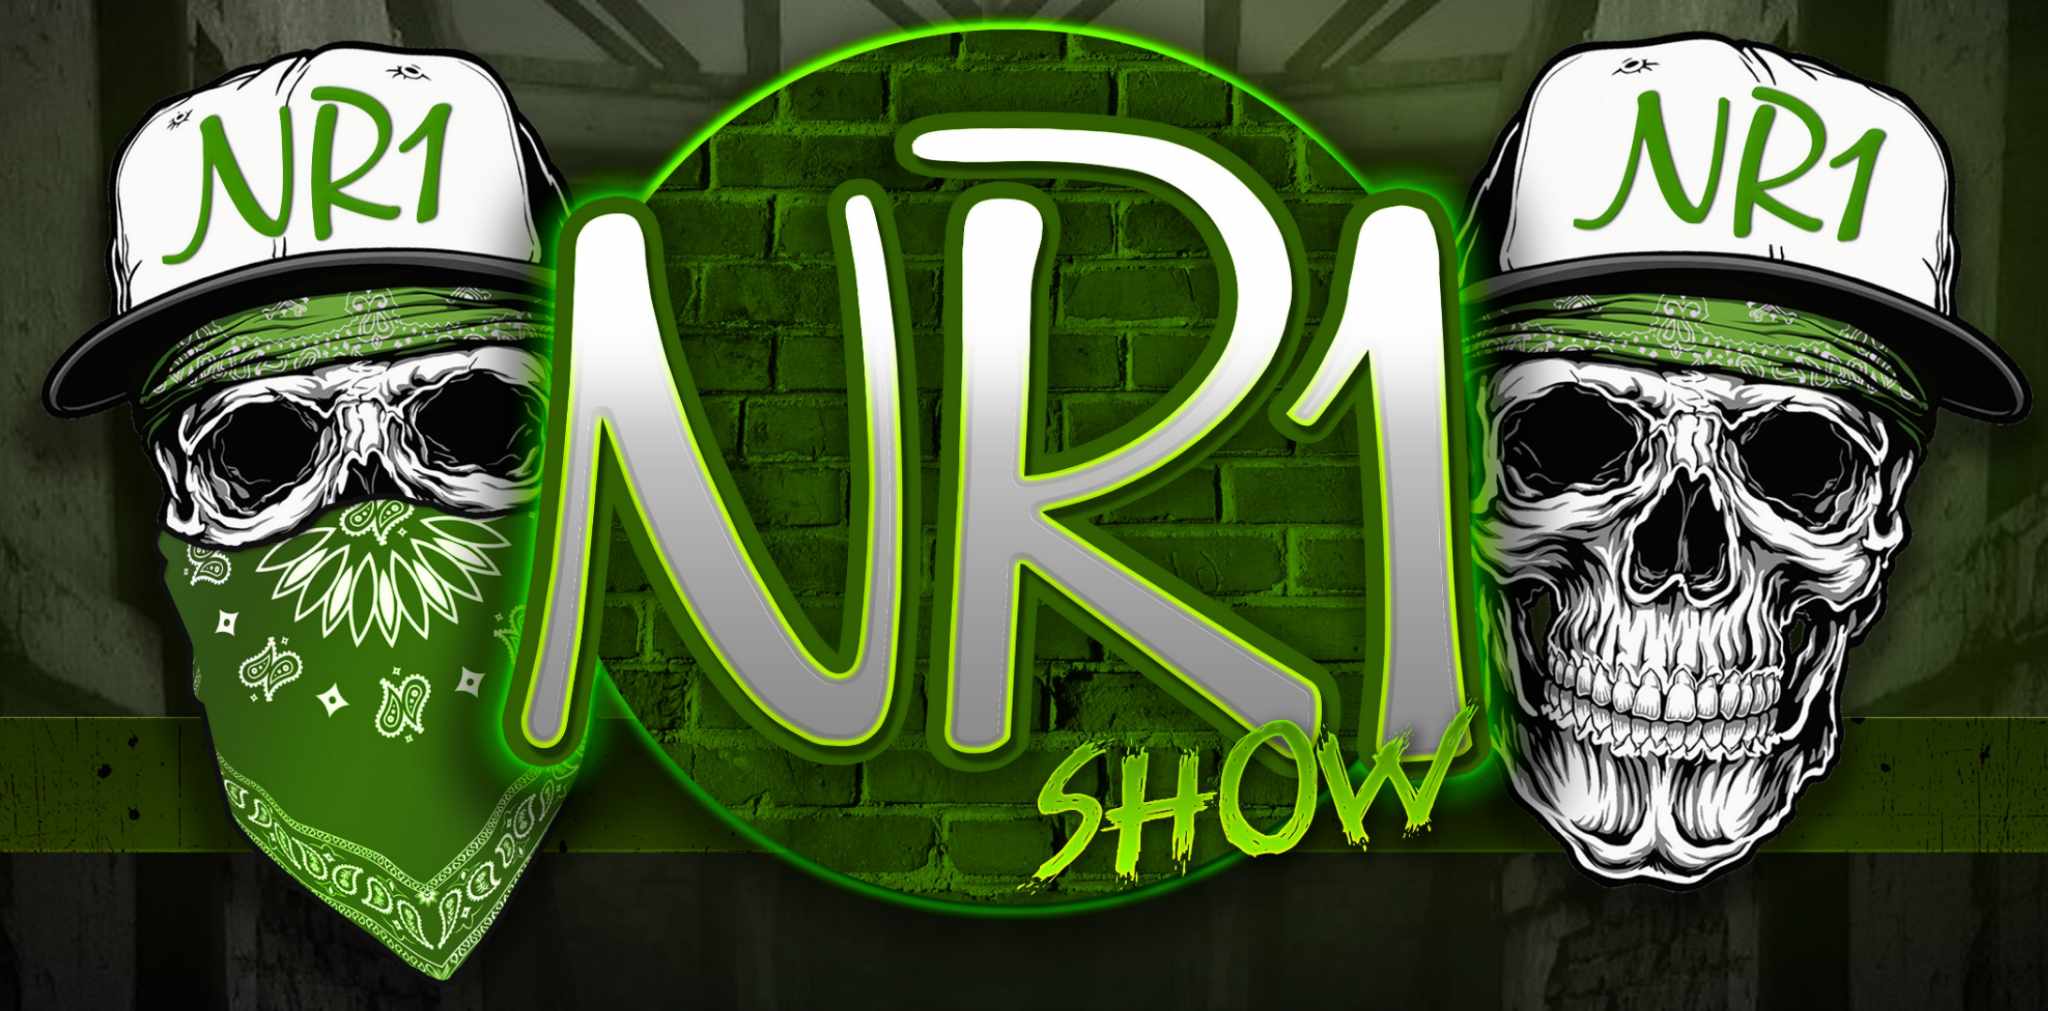 NR1 RADIO EACH'N'EVERY WED & FRI! LIVE FROM 6PM